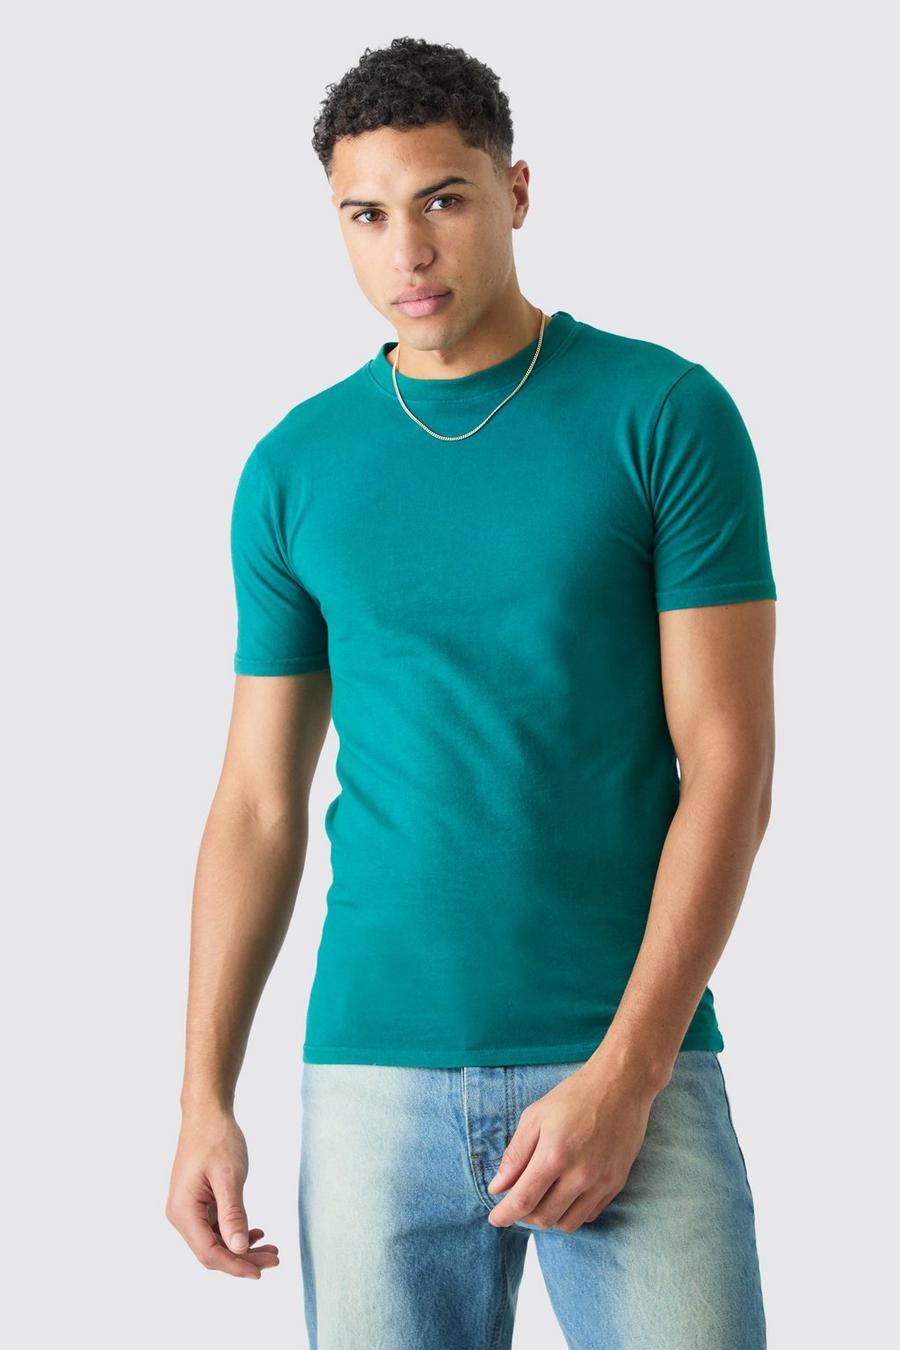 Teal Muscle Fit Washed Crew Neck T-shirt